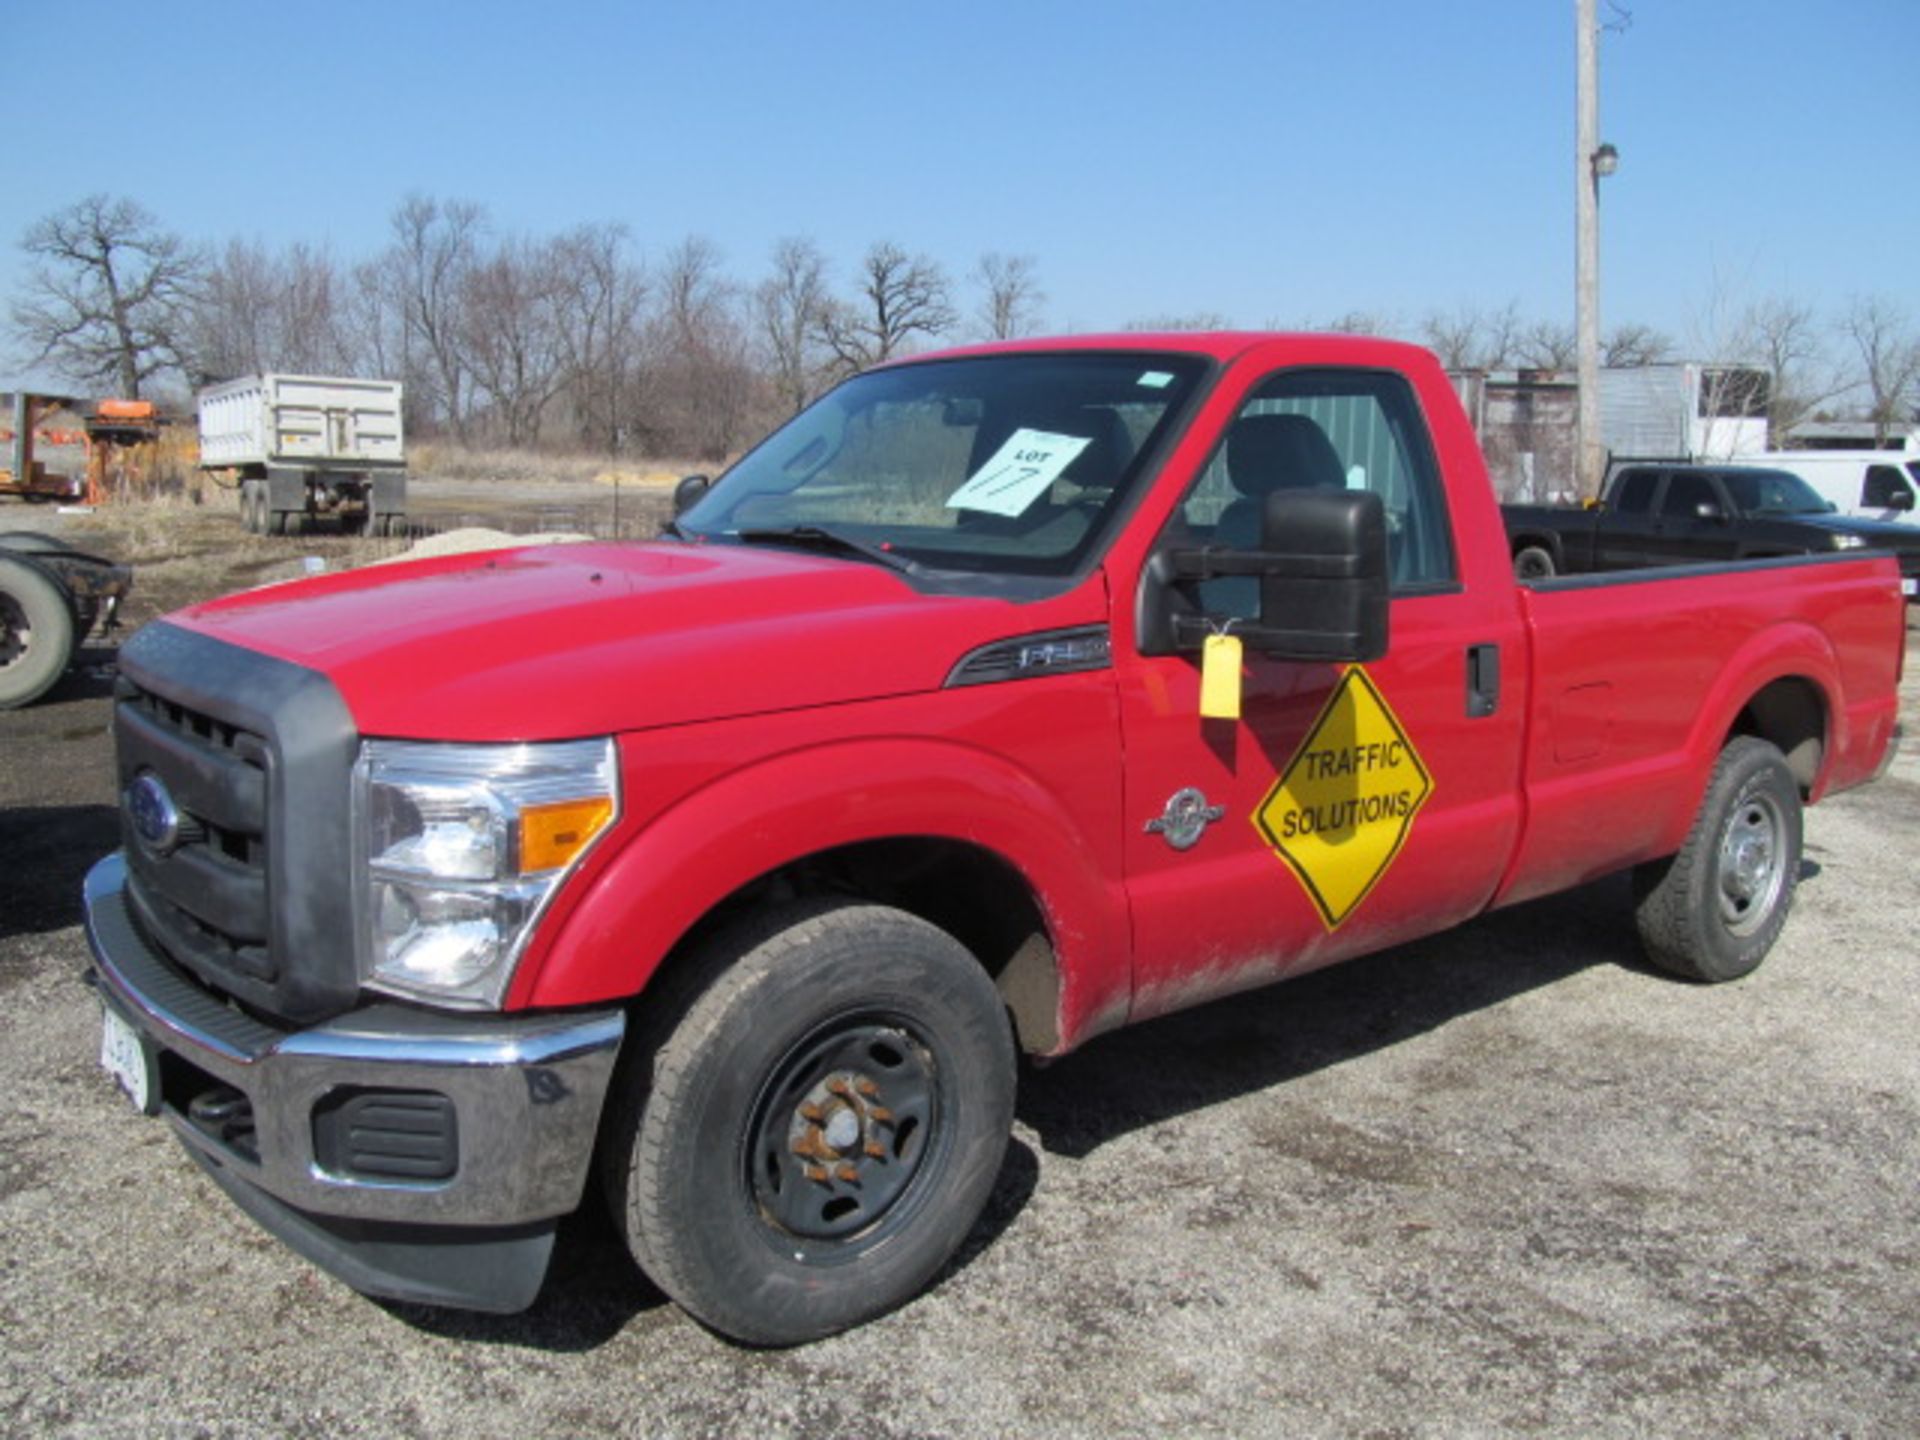 2014 Ford F250 Pickup Truck (VIN: 1FTBF2AT9EEA13237)[Estimated Mileage: 115,149] (Subject To